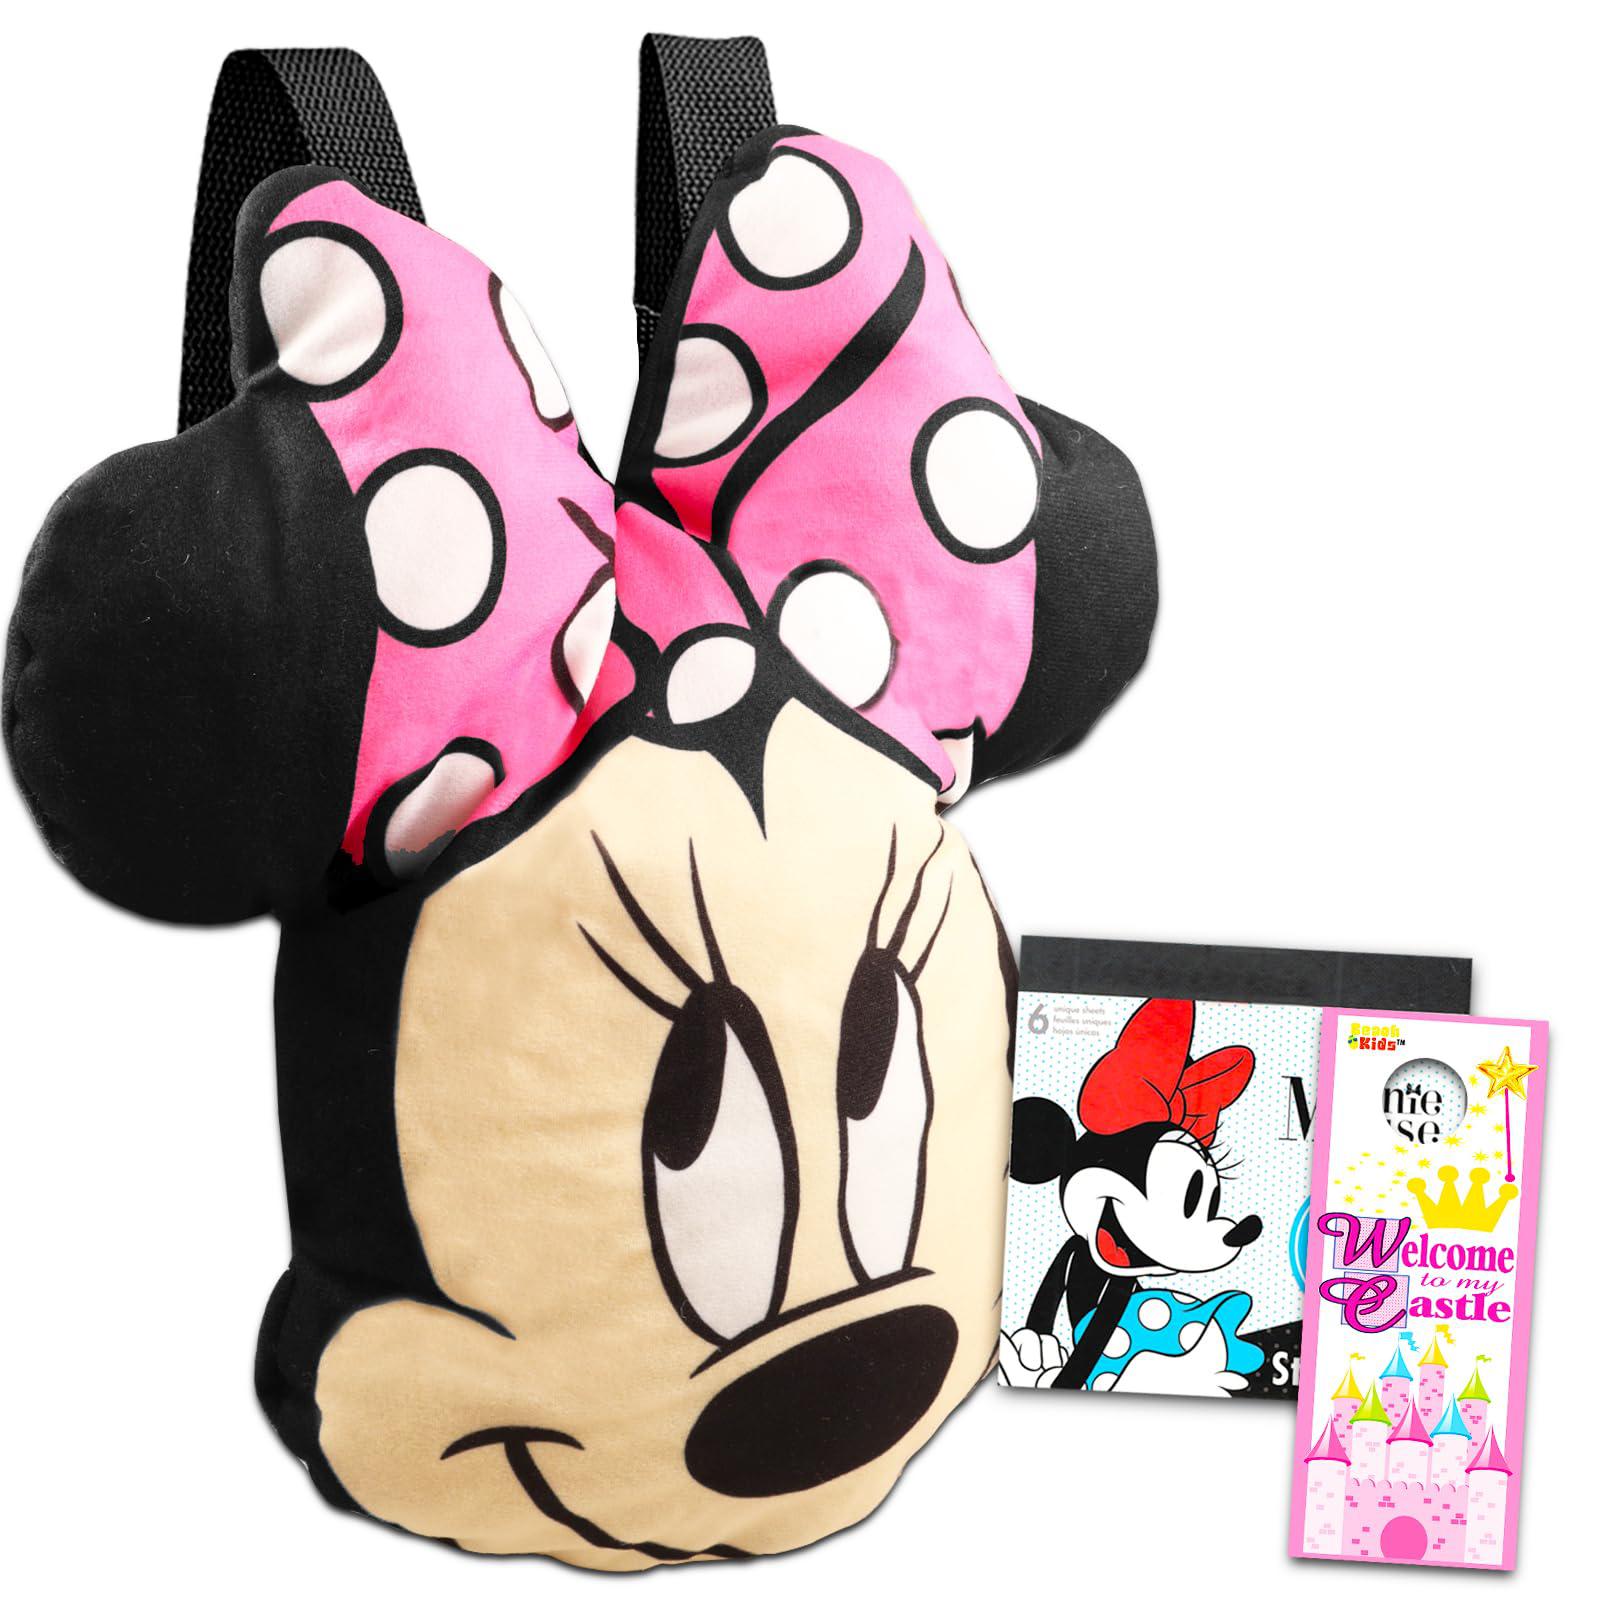 Fast Forward minnie mouse plush backpack - bundle with minnie mouse backpack for girls 4-6